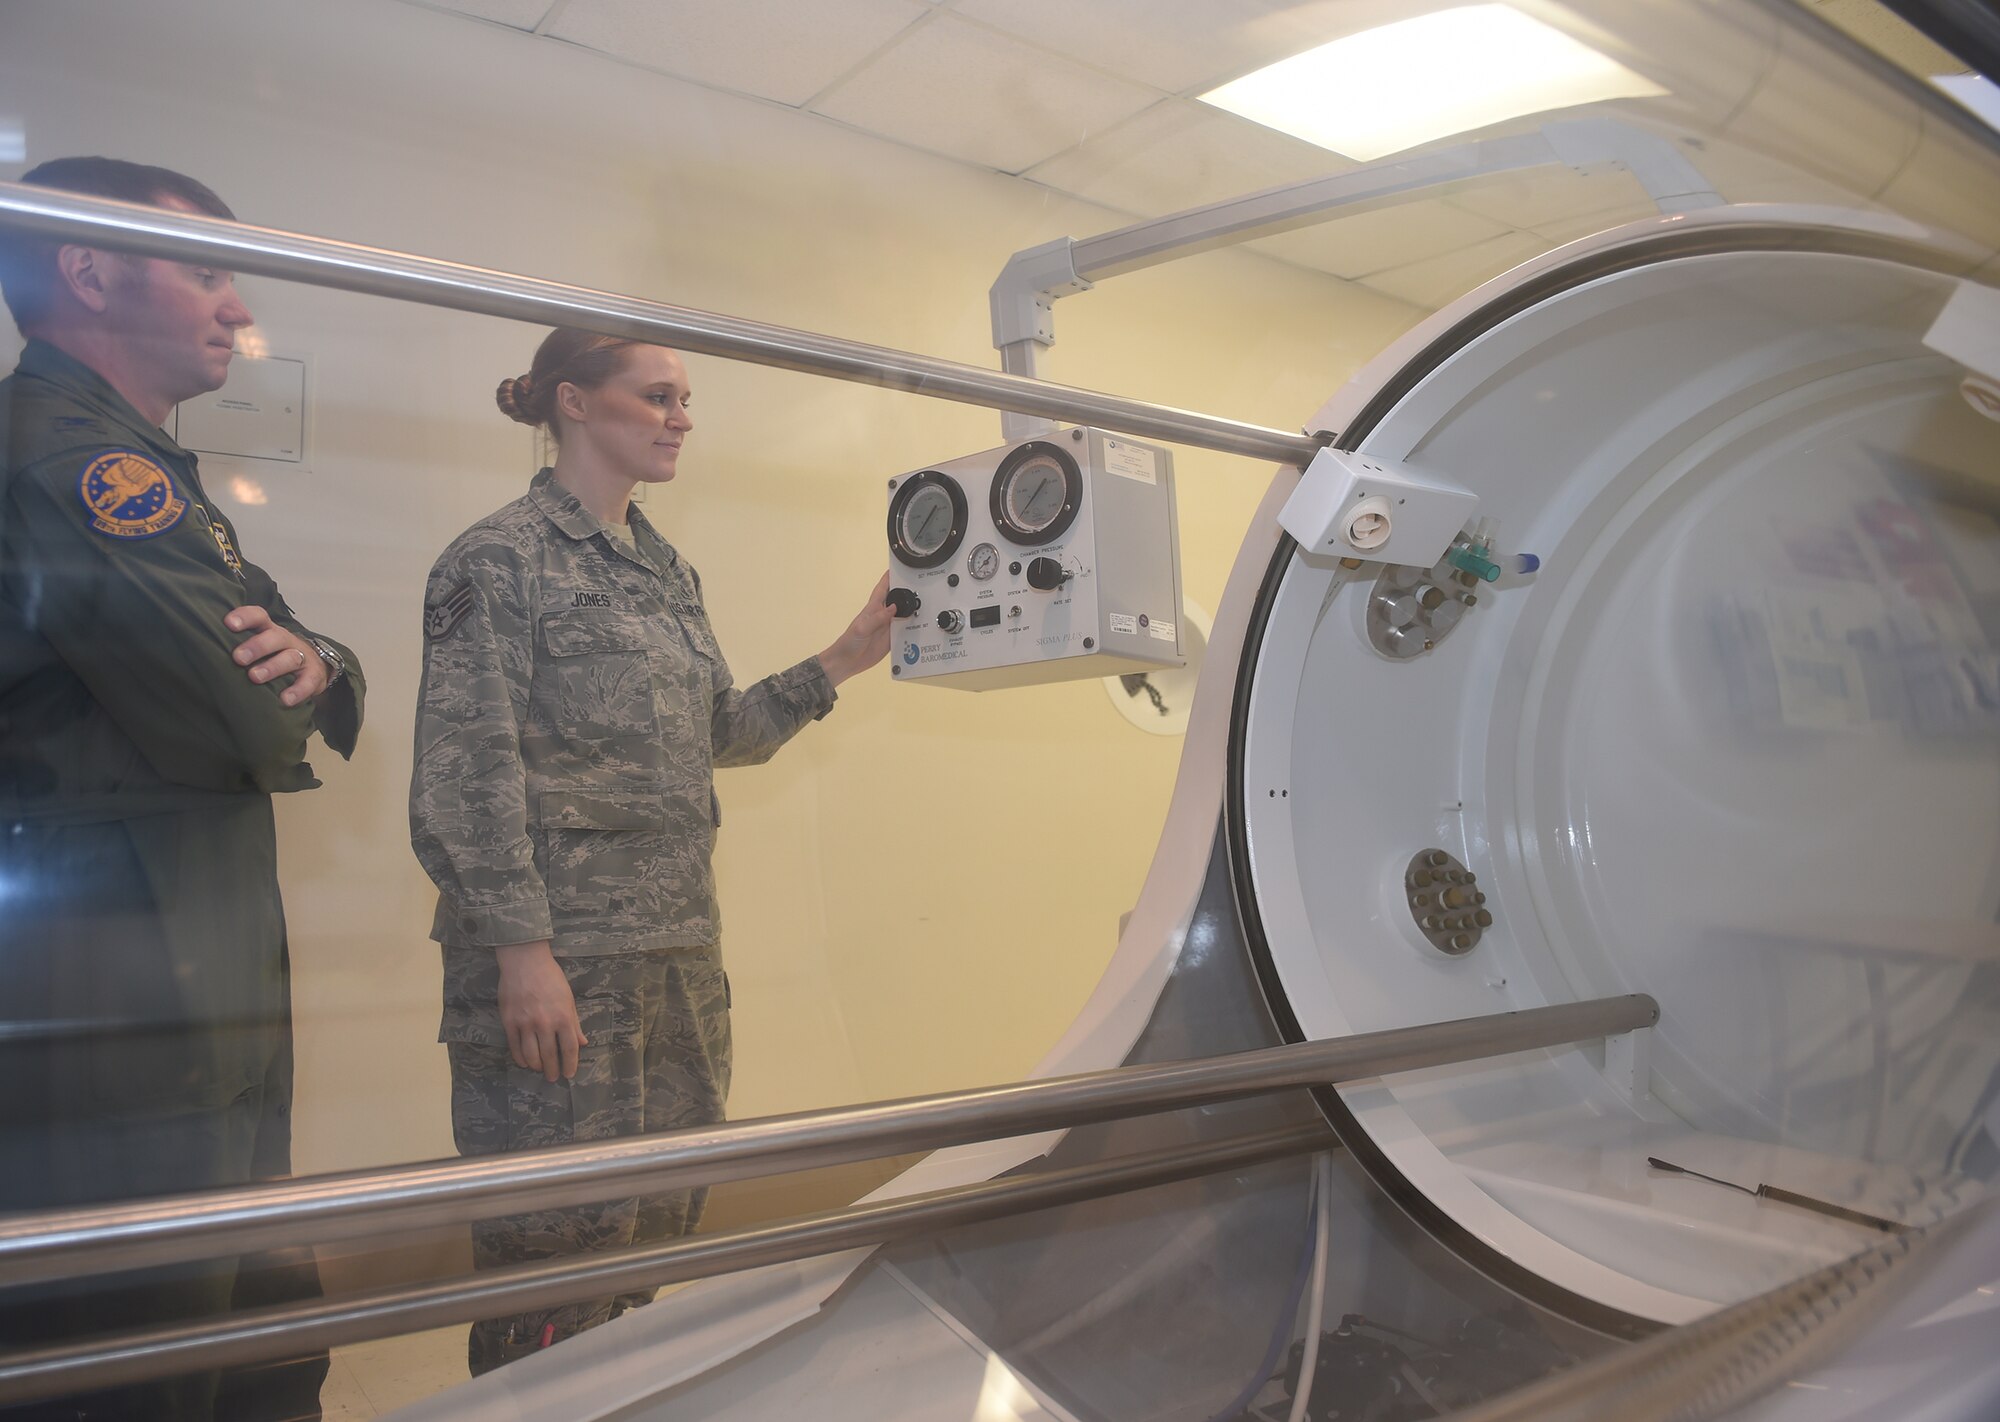 Col. Michael Richards, 59th Hyperbaric Medicine Flight commander, observes as Staff Sgt. Sherri Jones, hyperbaric medical technician, demonstrates the controls of the monoplace hyperbaric chamber at the Wilford Hall Ambulatory Surgical Center, Joint Base San Antonio-Lackland, Nov. 18, 2015. Treatments in the chamber help wounded warriors, diabetics and cancer patients recover more quickly from their ailments. (U.S. Air Force photo / Tech. Sgt. Christopher Carwile)
